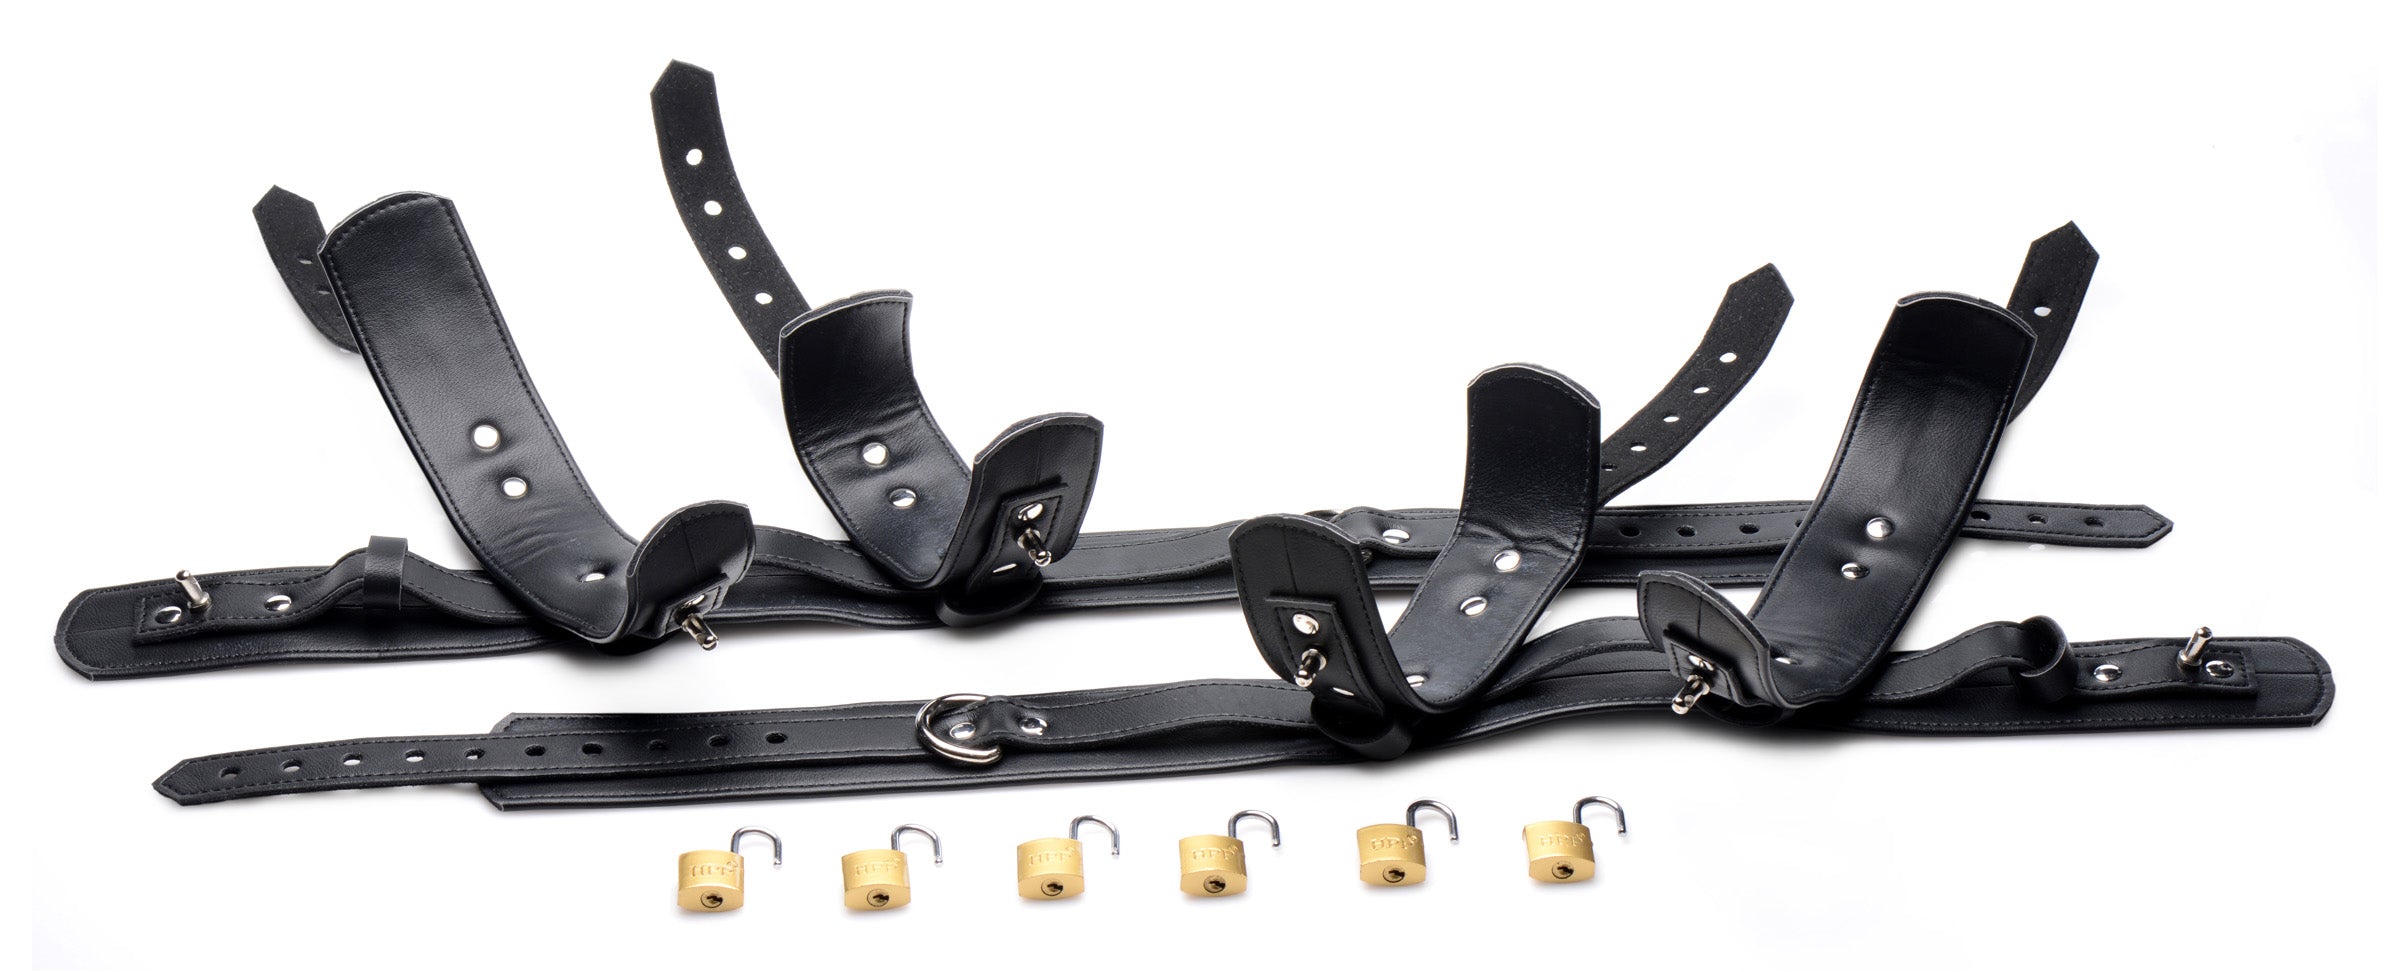 Frog-Tie Restraint Set – Adult Sex Toys, Intimate Supplies, Sexual Wellness, Online Sex Store image